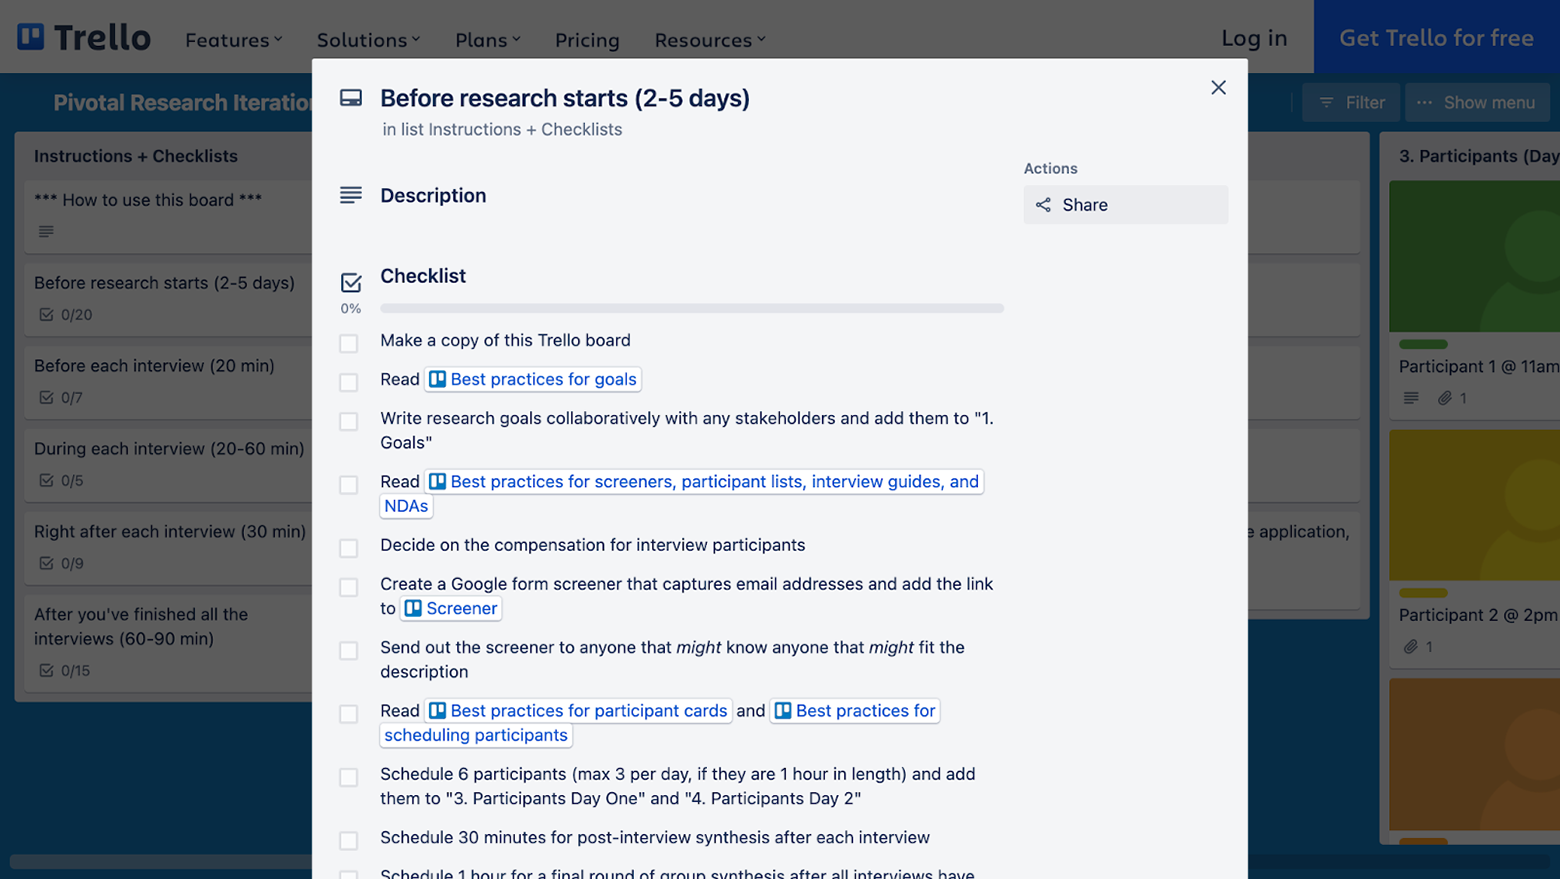 A checklist in Trello prepares team members for their research project. Items on the list include “Read best practices for goals,” “Decide on the compensation for interview participants,” and “Schedule 30 minutes for post-interview synthesis after each interview.”